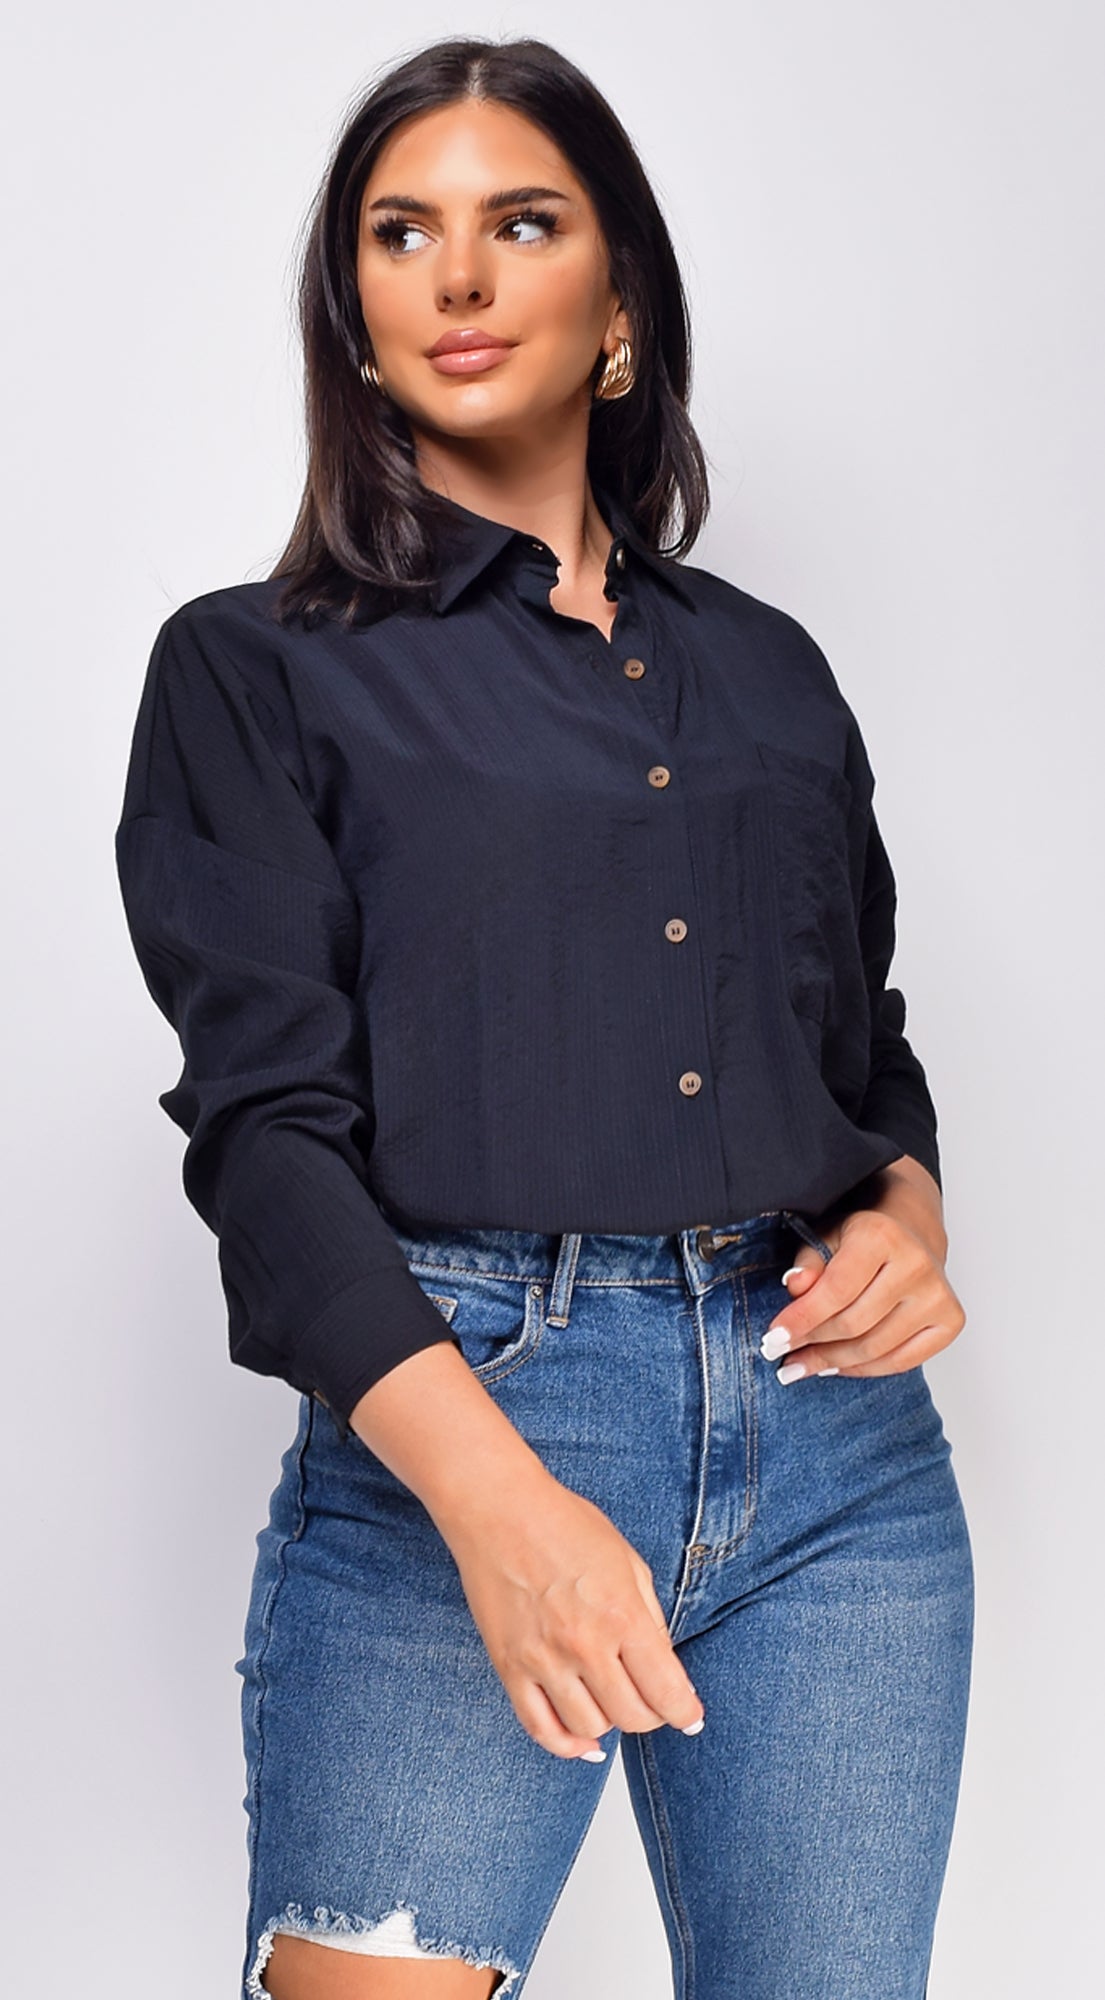 Jenny Black Collared Button Down Shirt